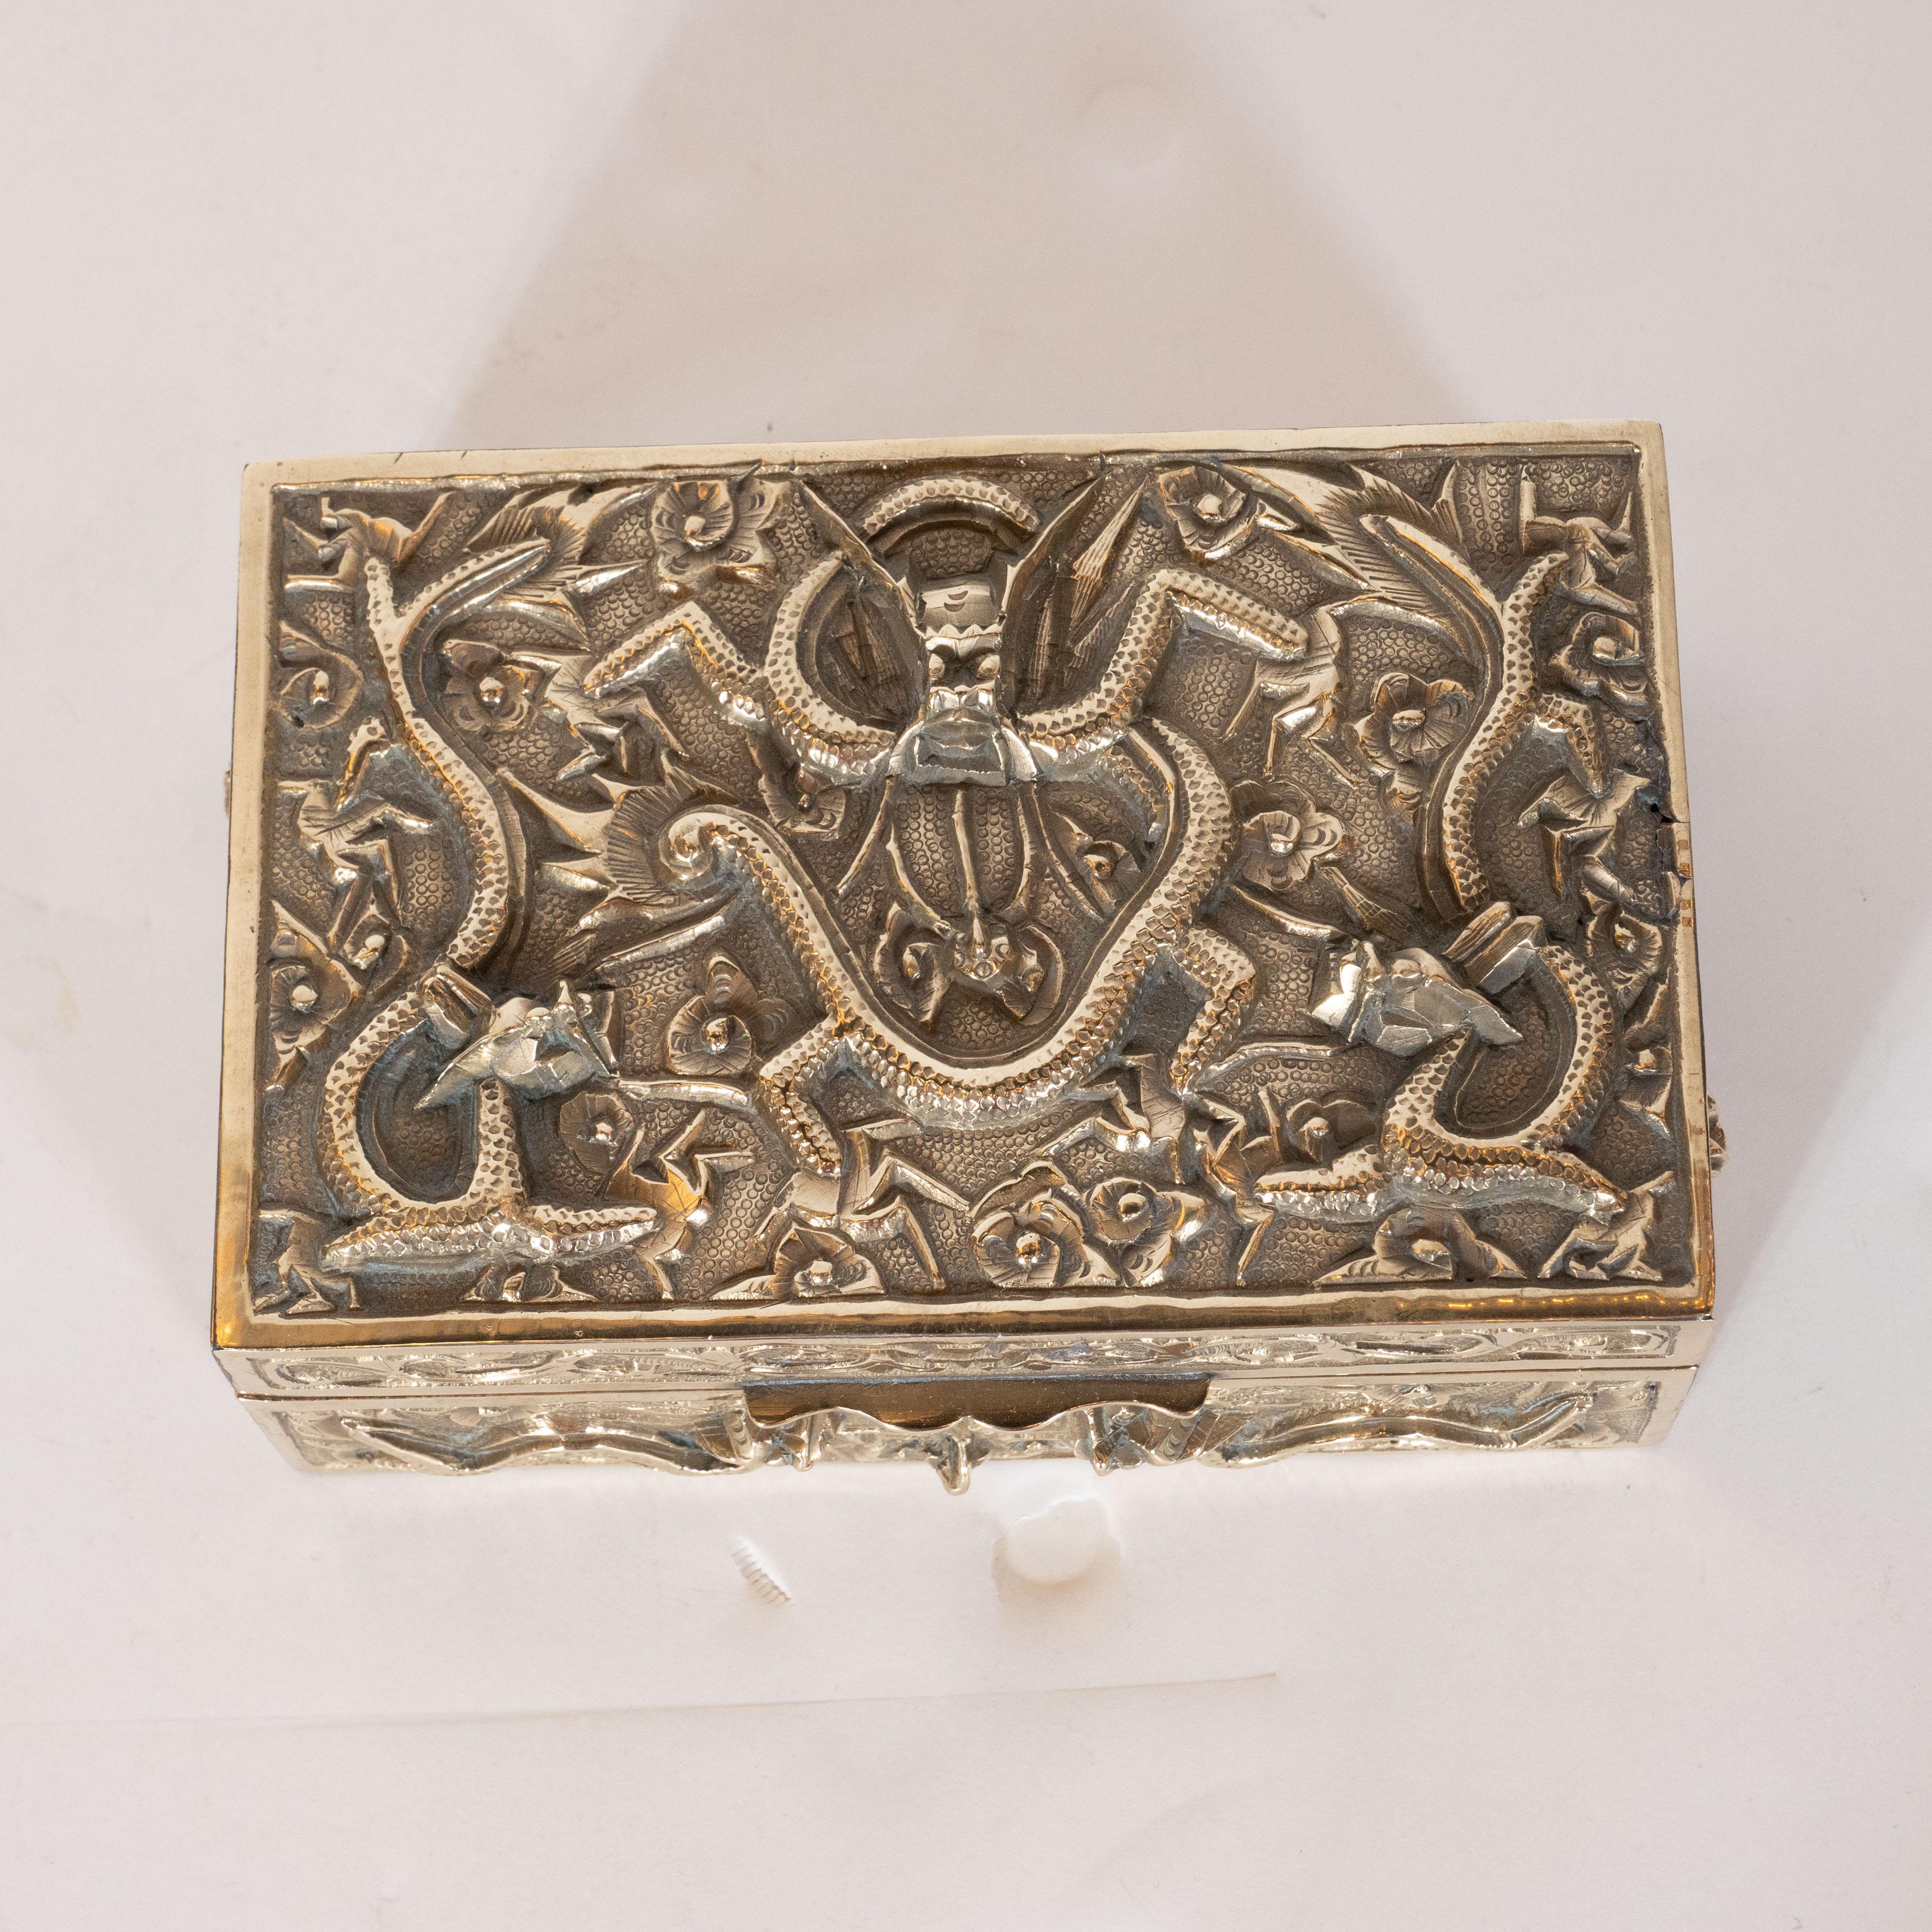 This stunning decorative box was realized in China, circa 1930. It features a rectangular body with a stippled texture and undulating dragons, as well as stylized floral/foliate motifs, inscribed in high relief throughout the surface of the piece.